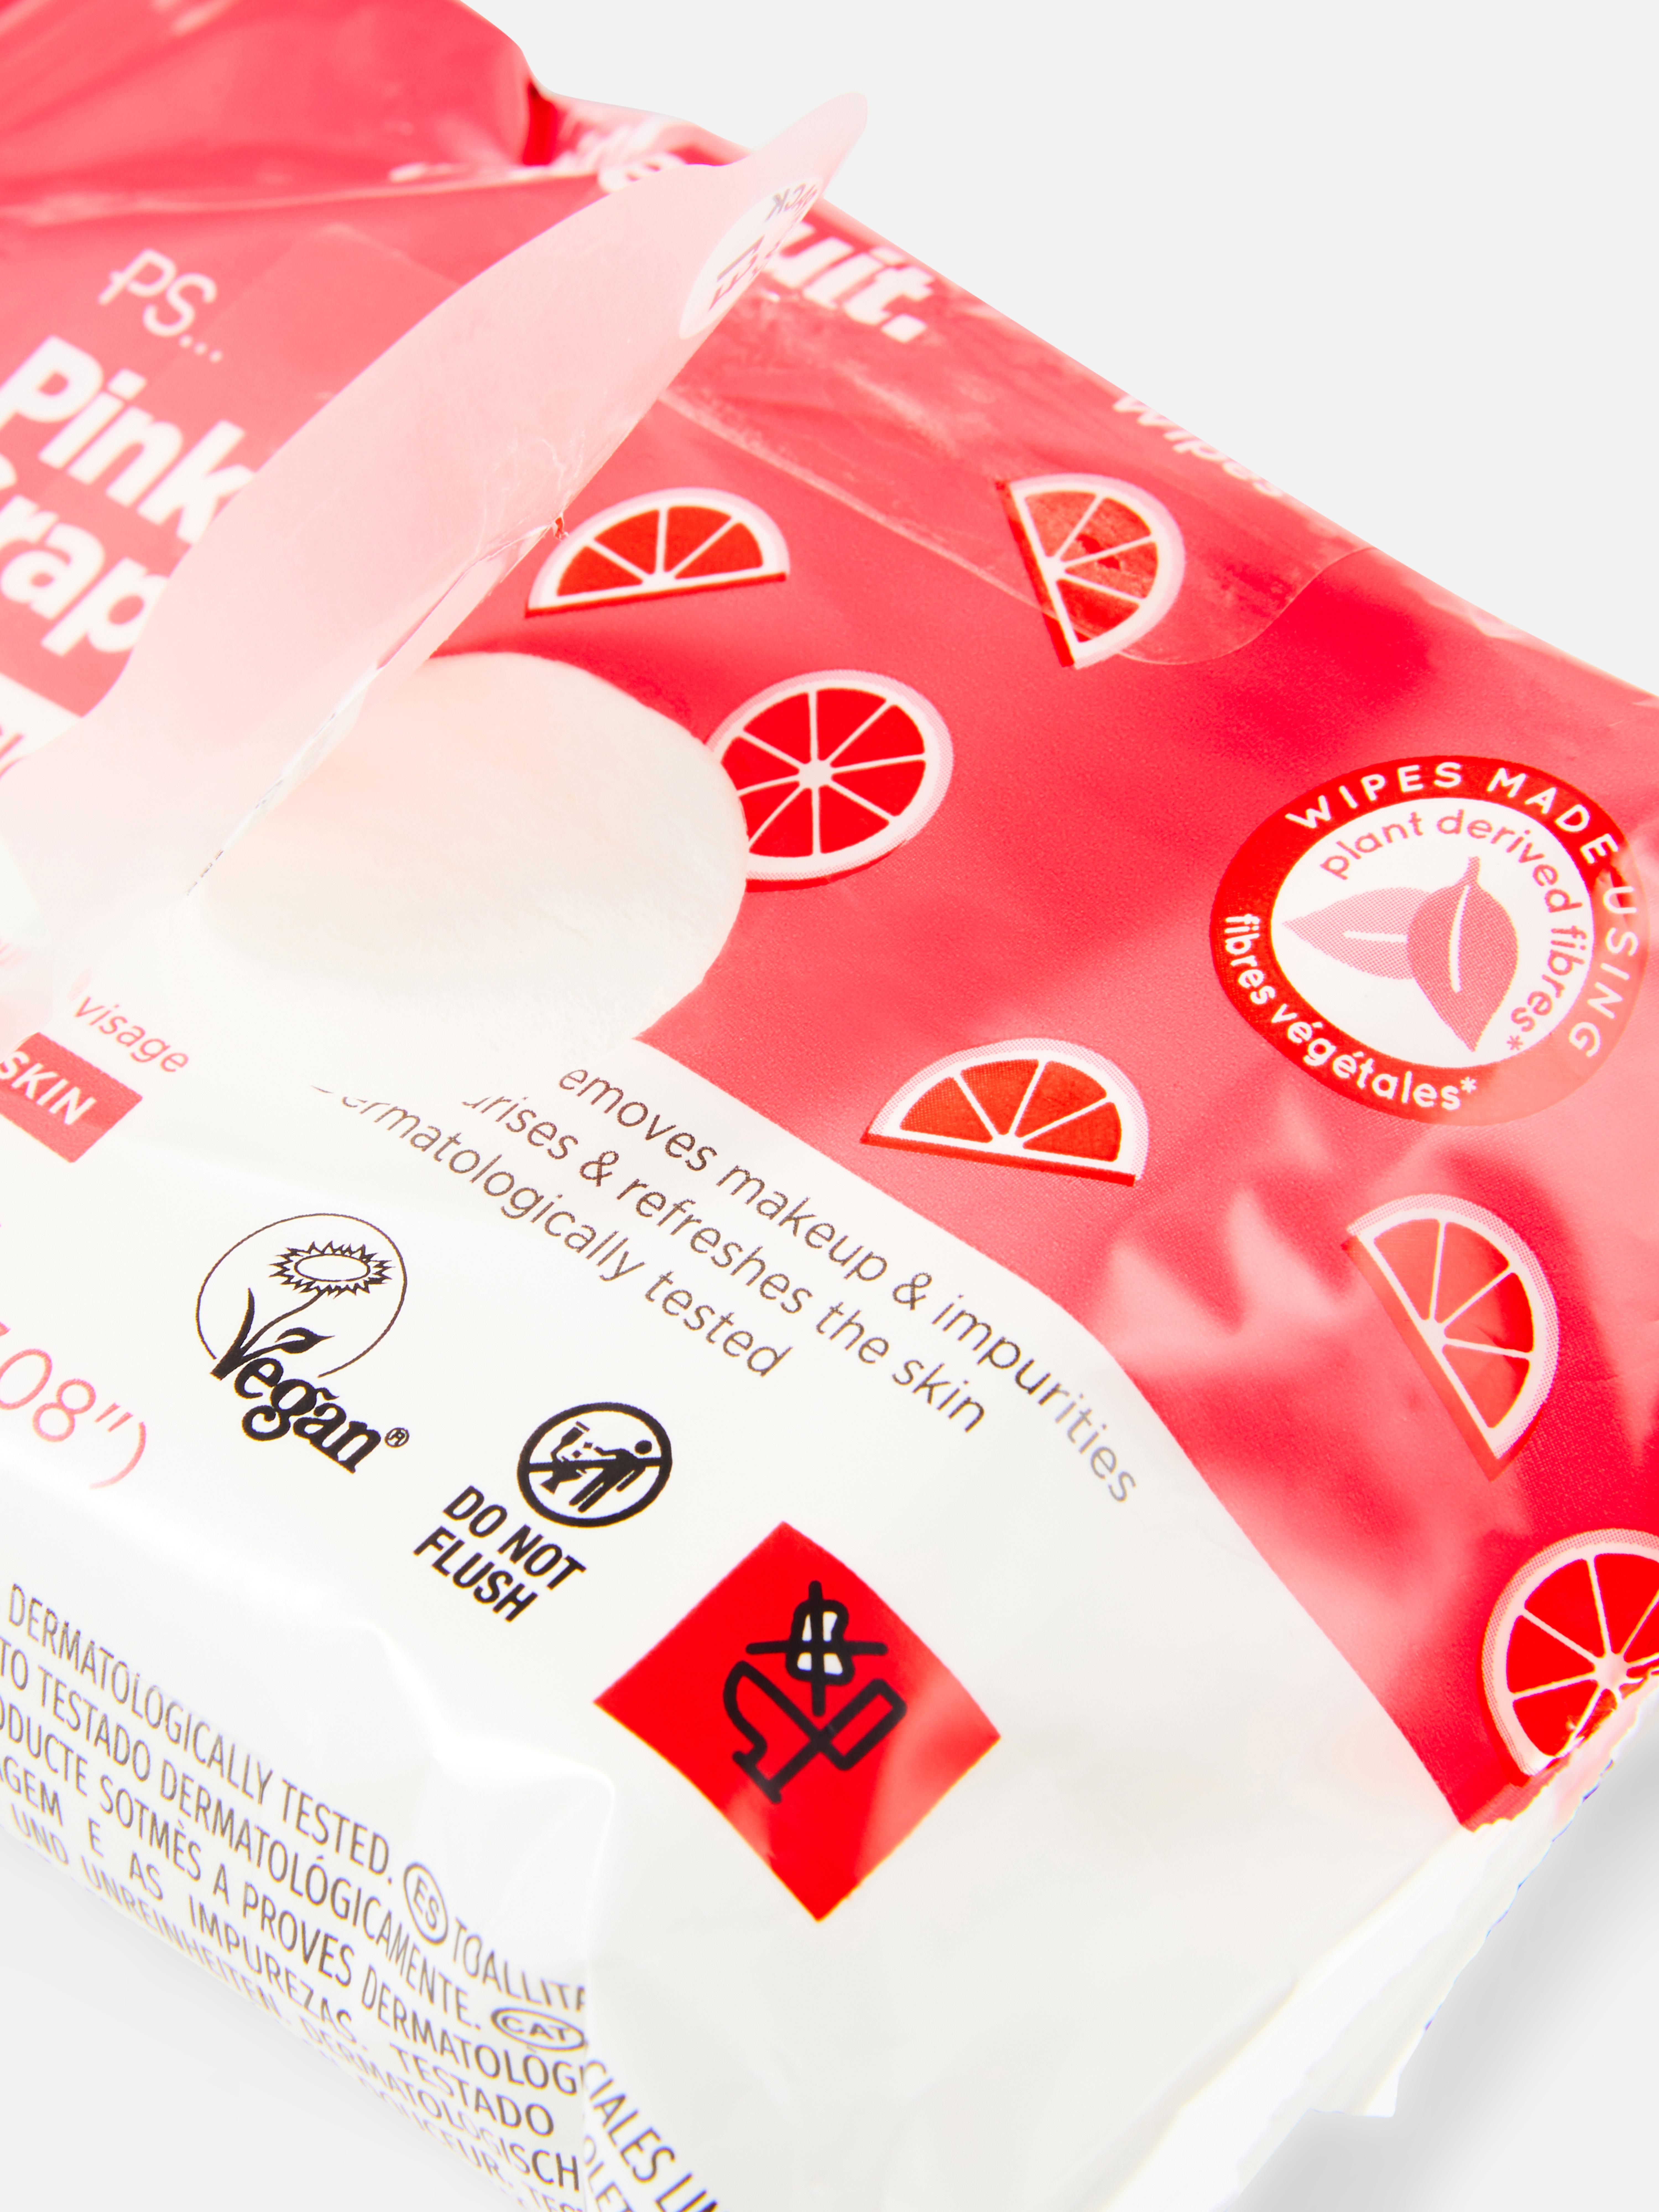 PS… Pink Grapefruit Facial Cleansing Wipes